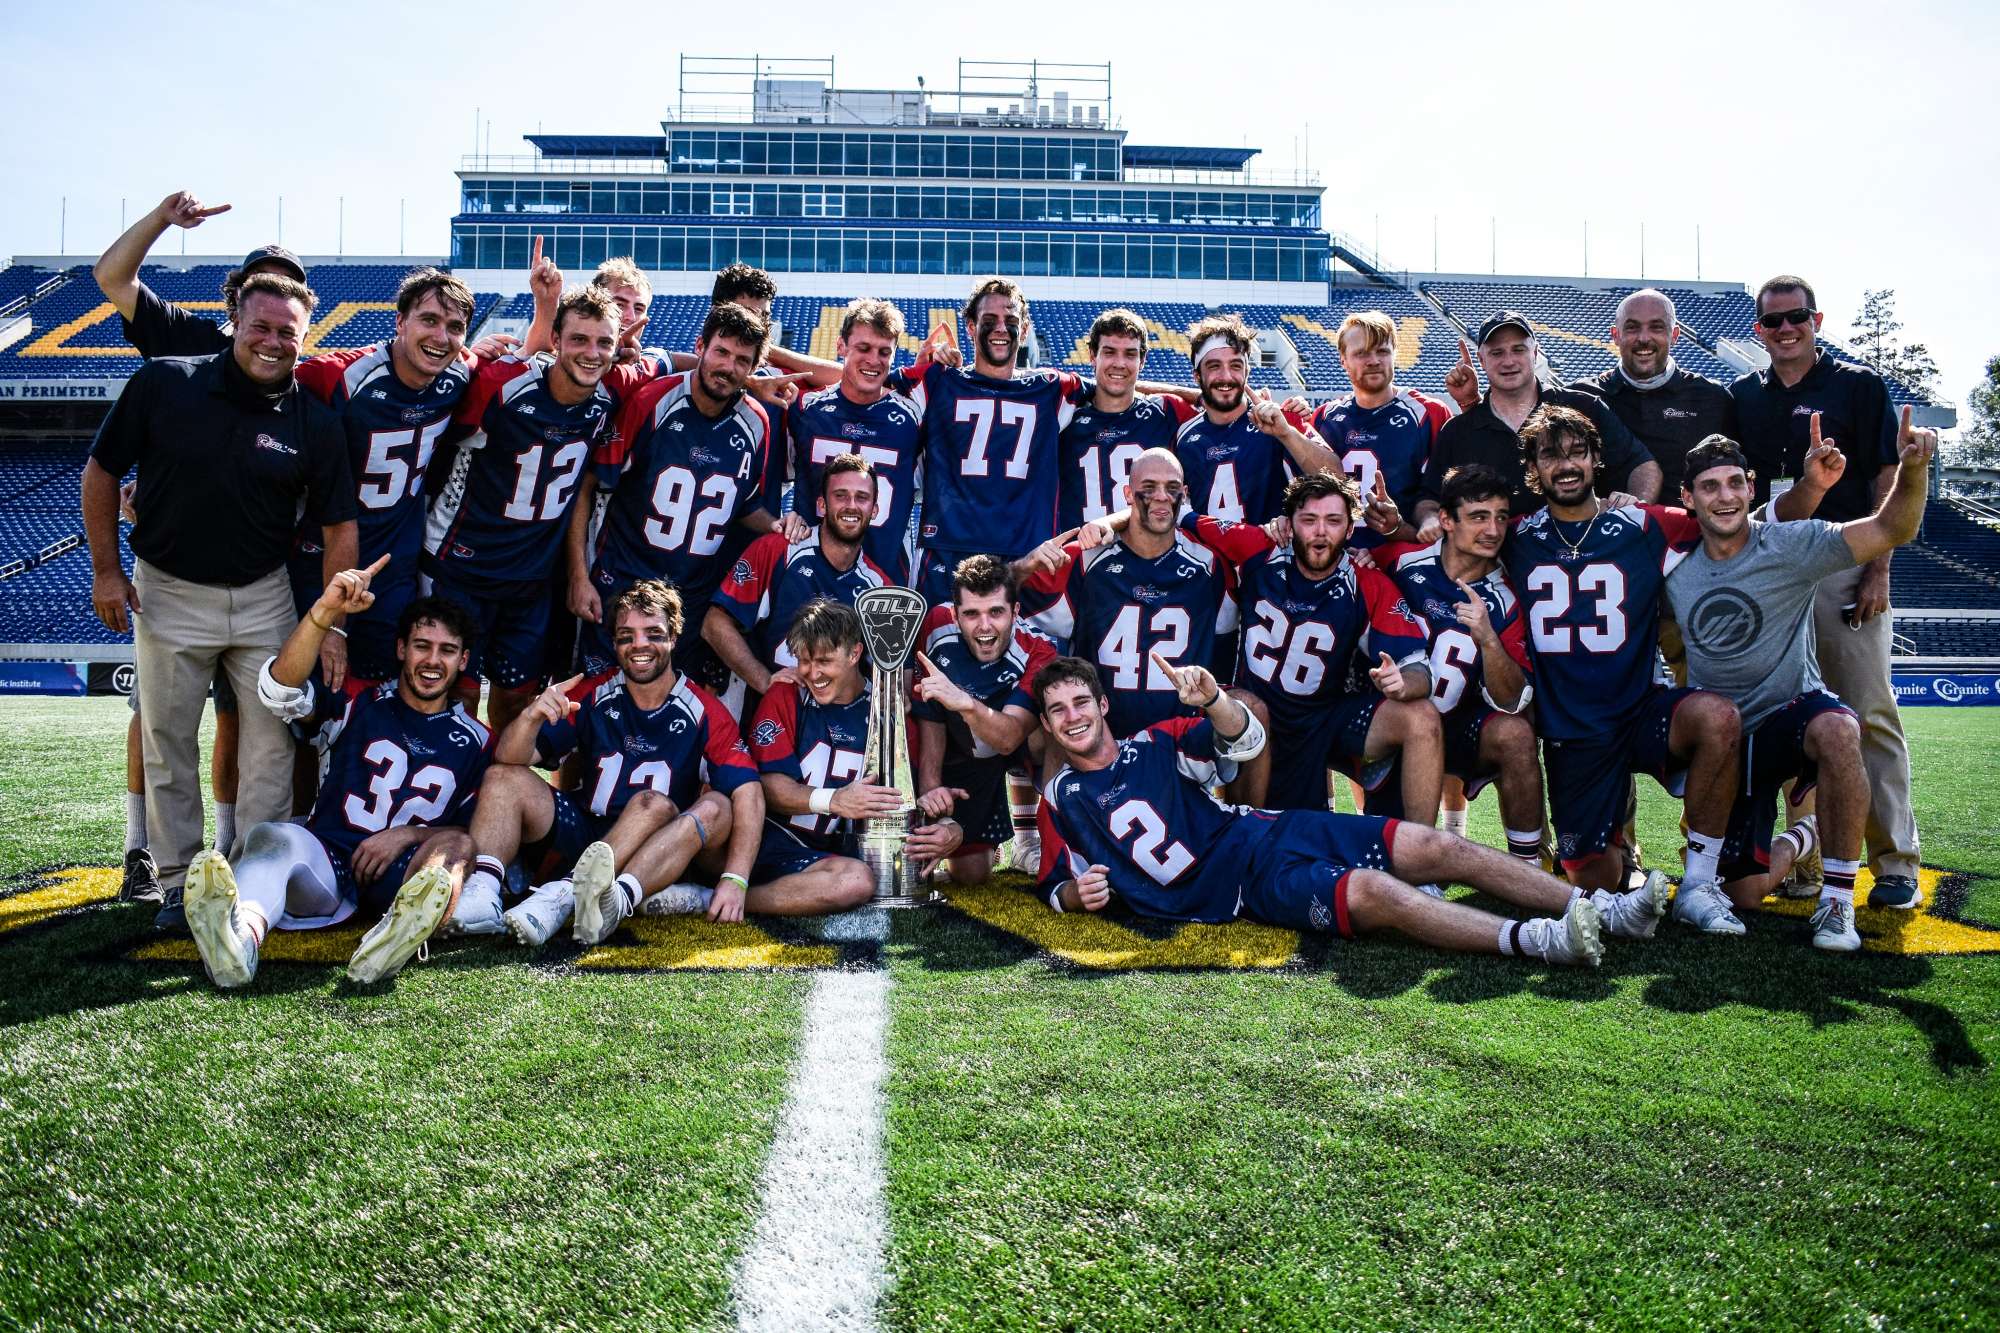 Nahant’s Quirk, Boston Cannons win MLL championship - Itemlive : Itemlive